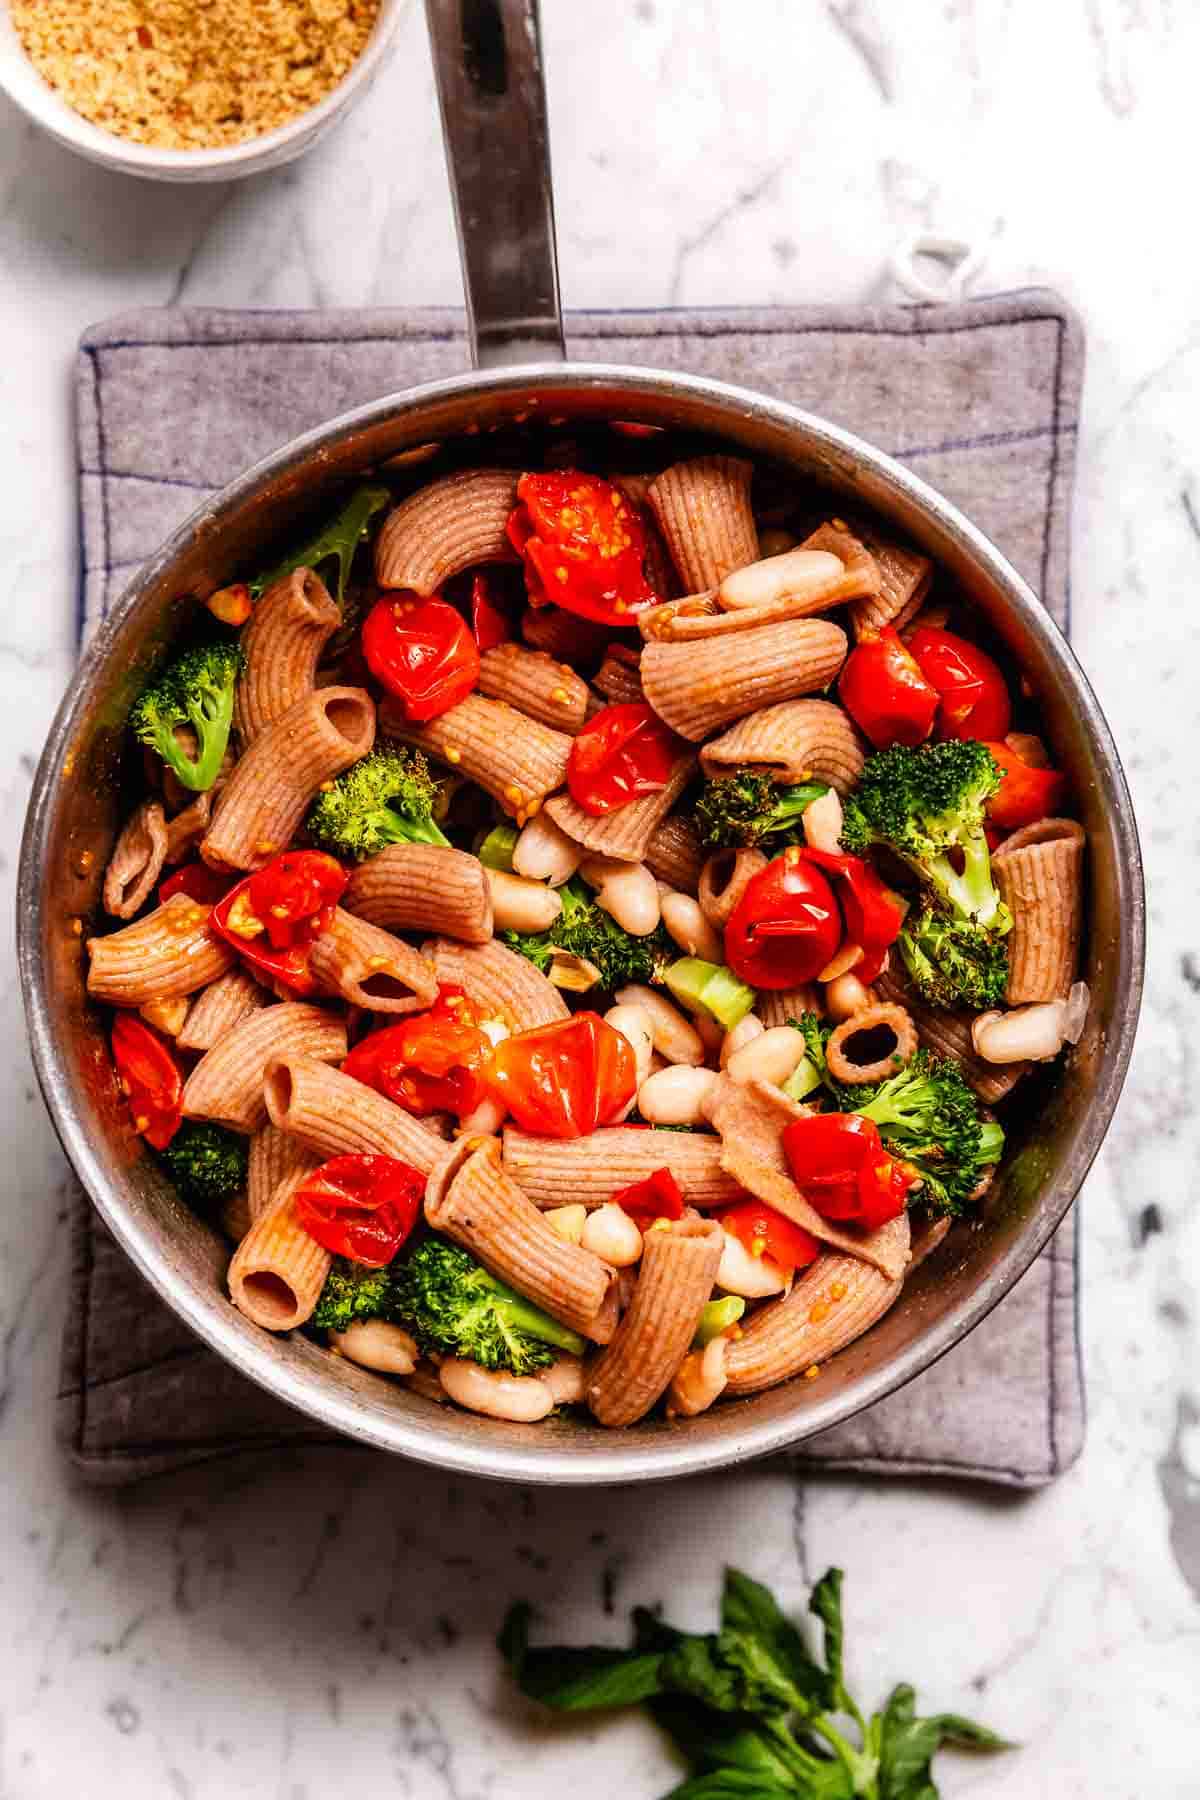 Roasted broccoli and cherry tomatoes, white beans, and basil stirred into a pot of pasta.